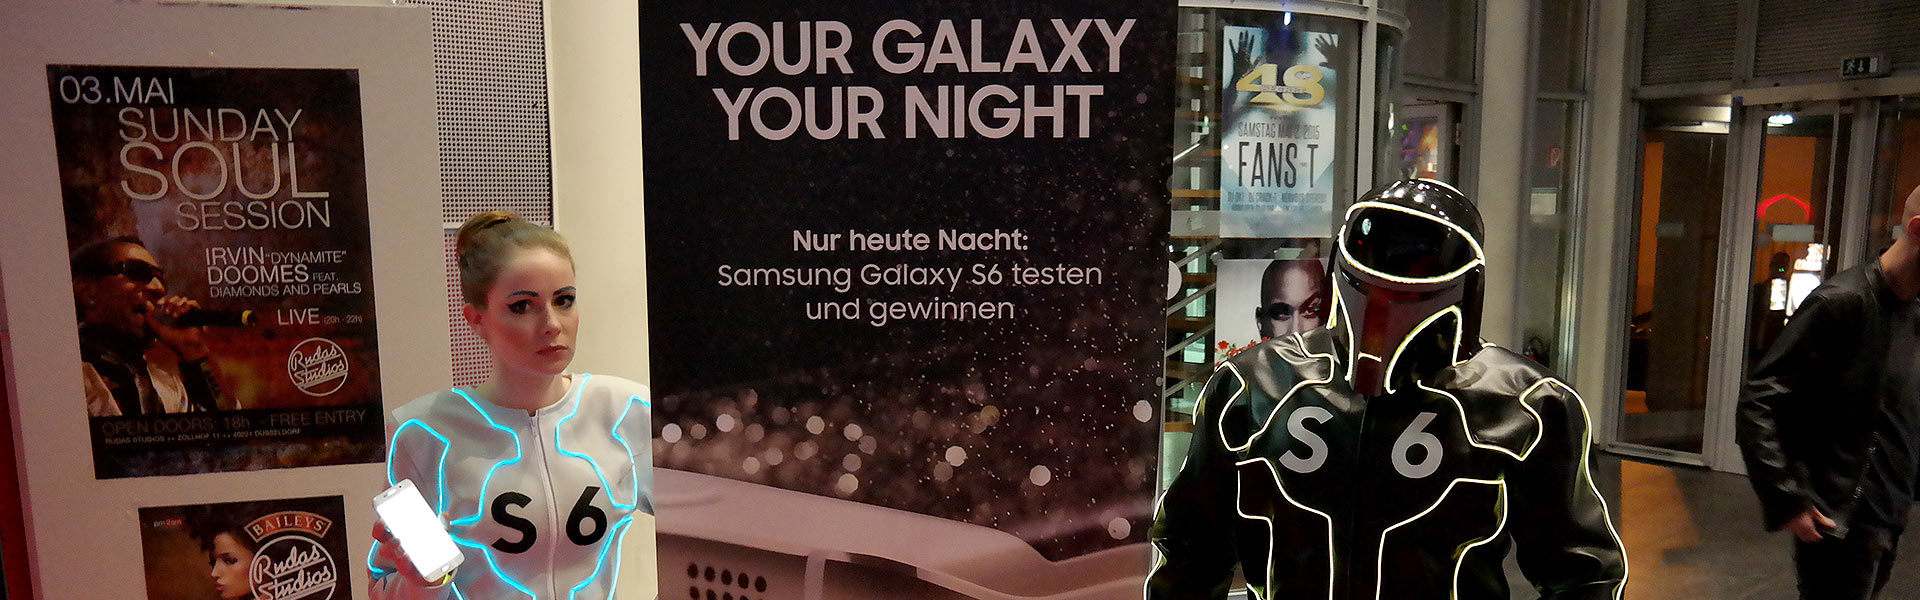 Samsung Galaxy S6 Club Tour 2015 Next is Now Club Clubszene Clubgänger Promotion Your Galaxy Your Night